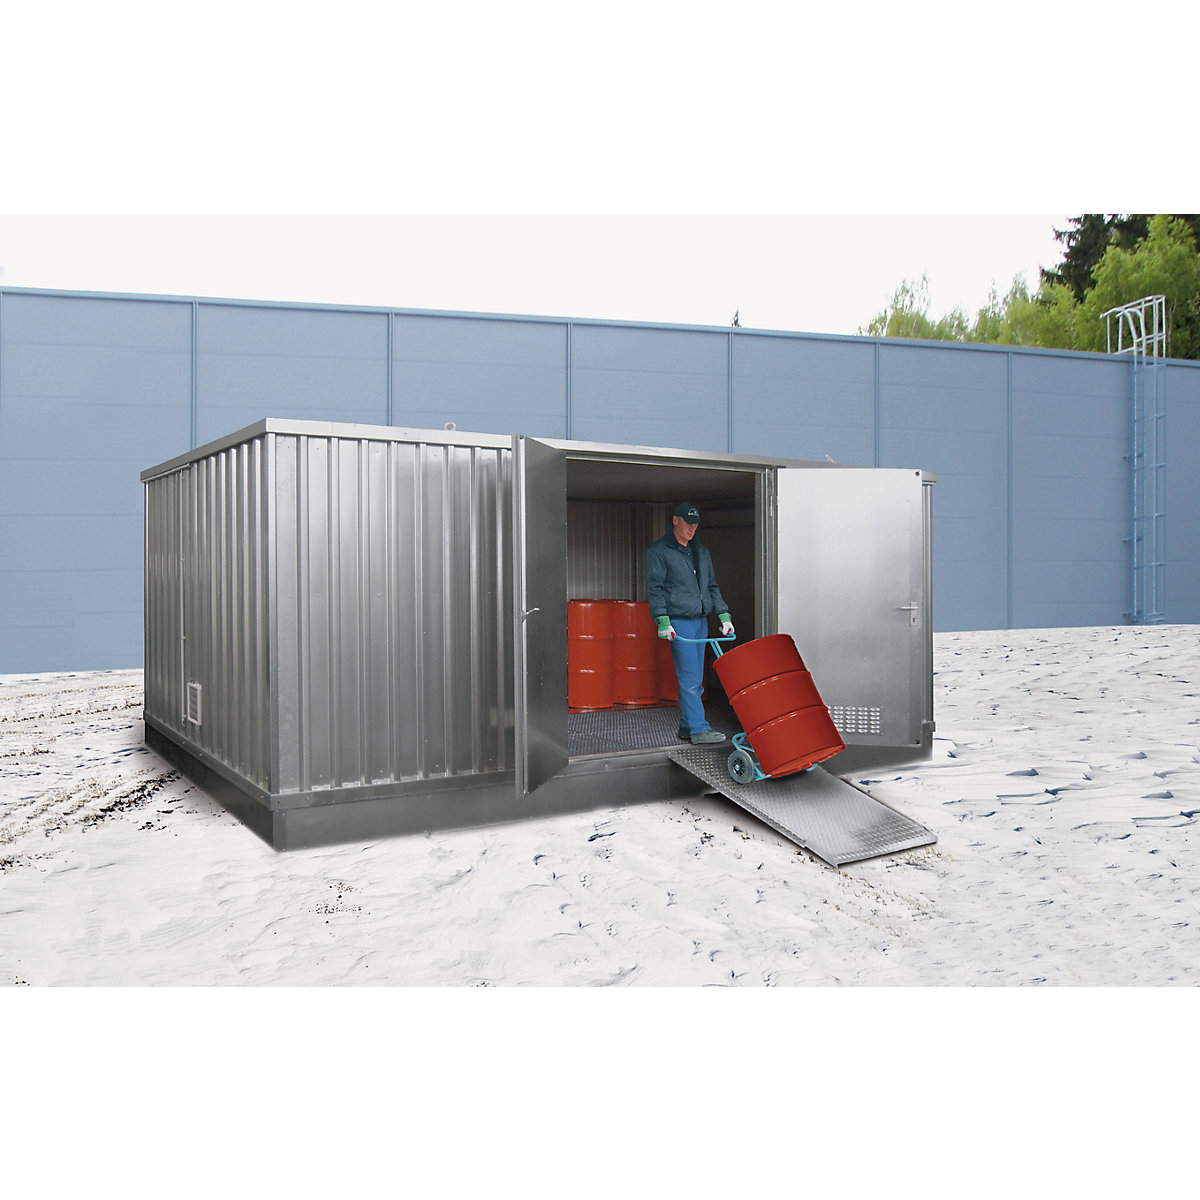 Hazardous goods storage container for flammable media, cold-insulated - LaCont